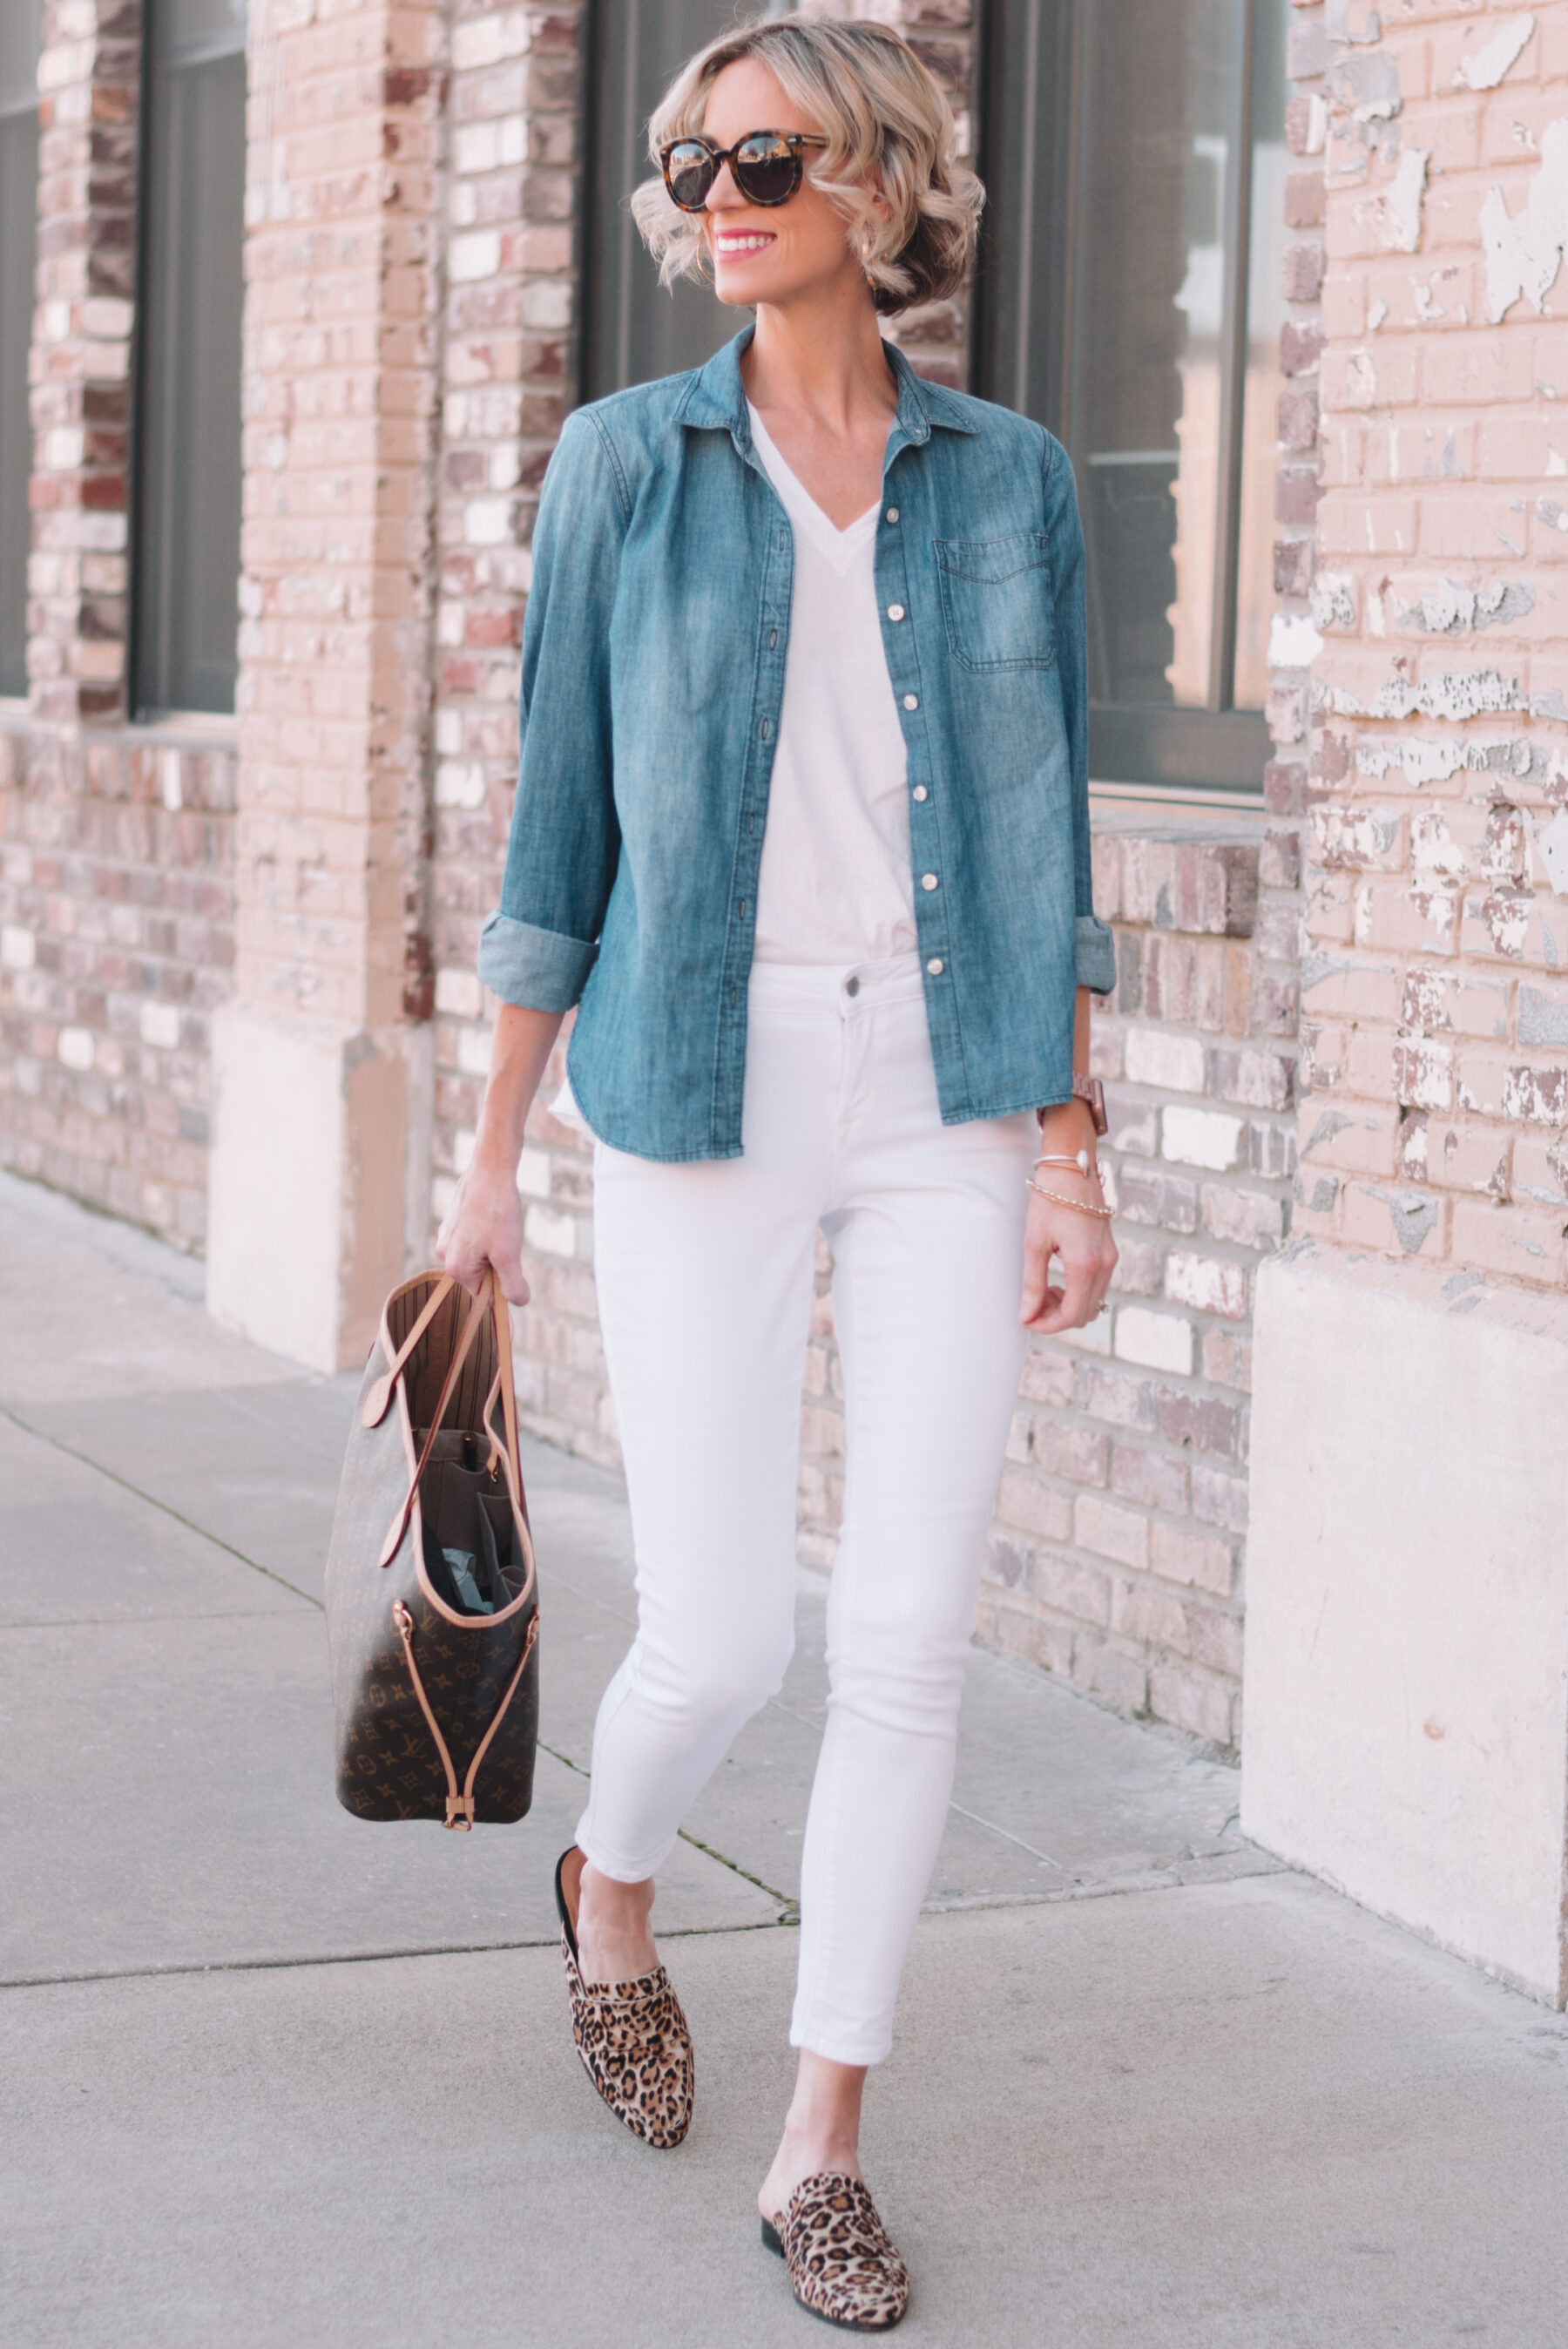 How to Style Chambray – 6 Bloggers Share Their Outfits